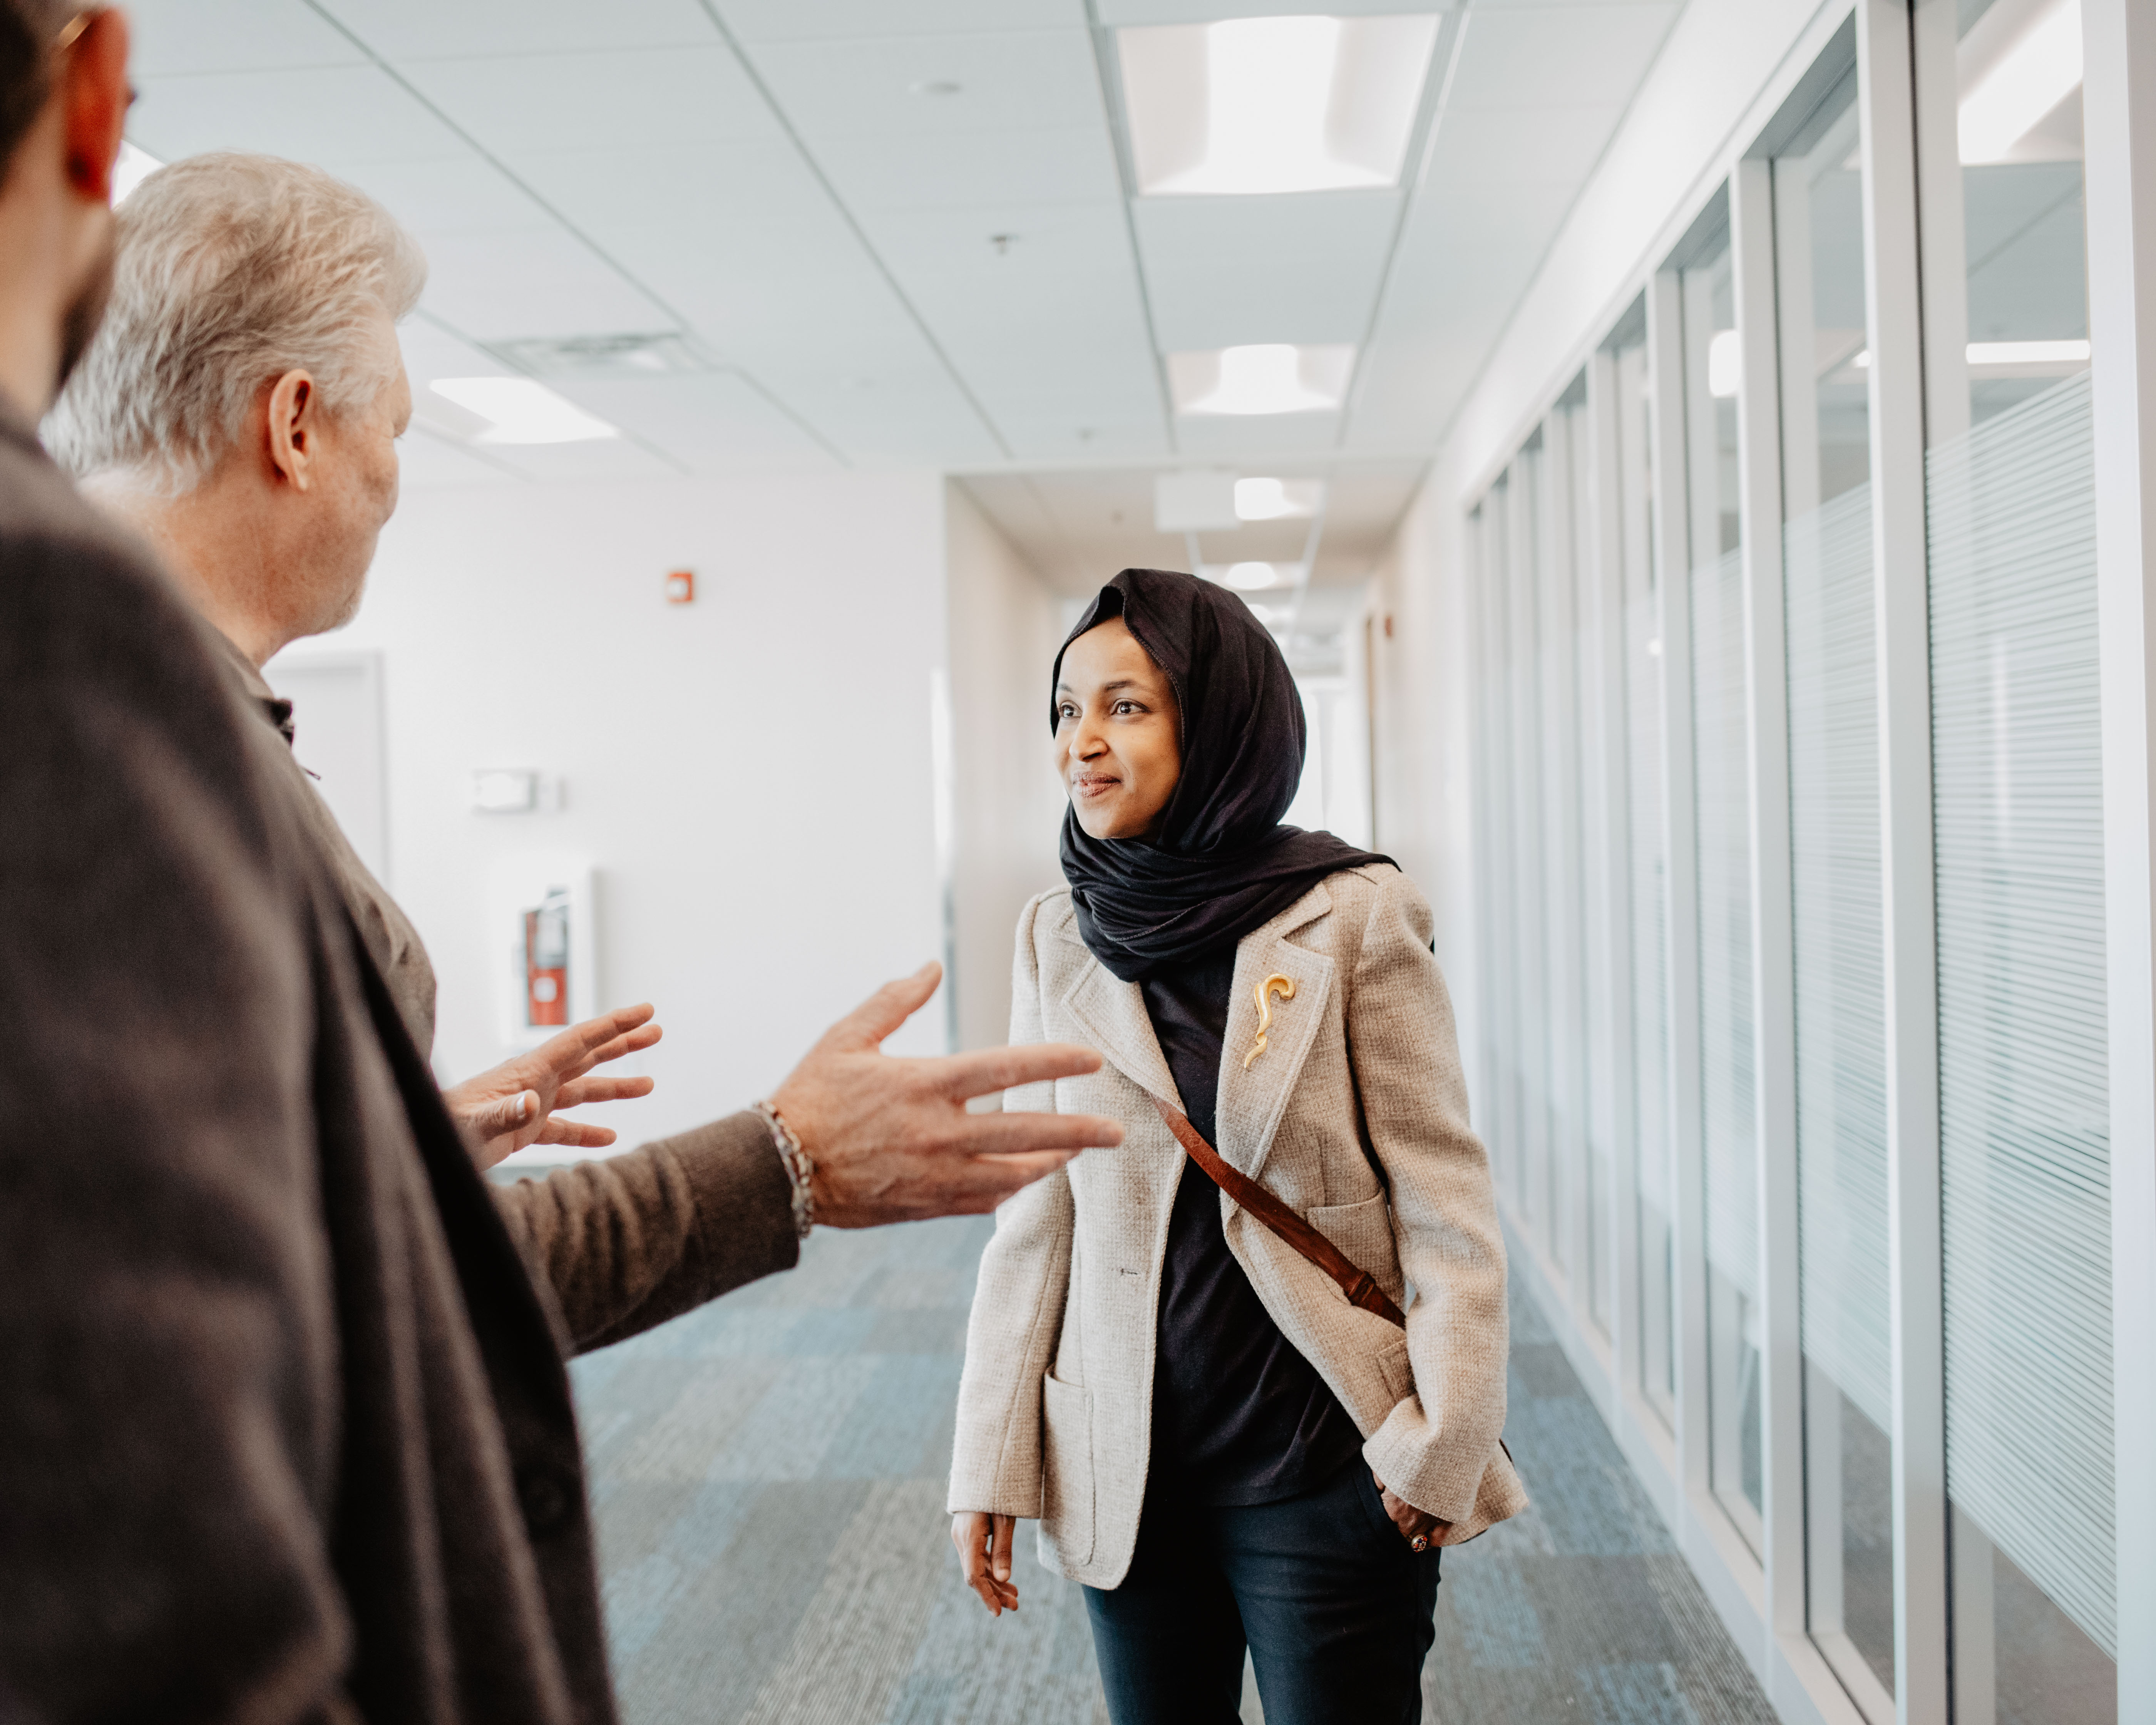 Ilhan Omar tours Open Door Minneapolis campus wearing a black hijab and a tan blazer